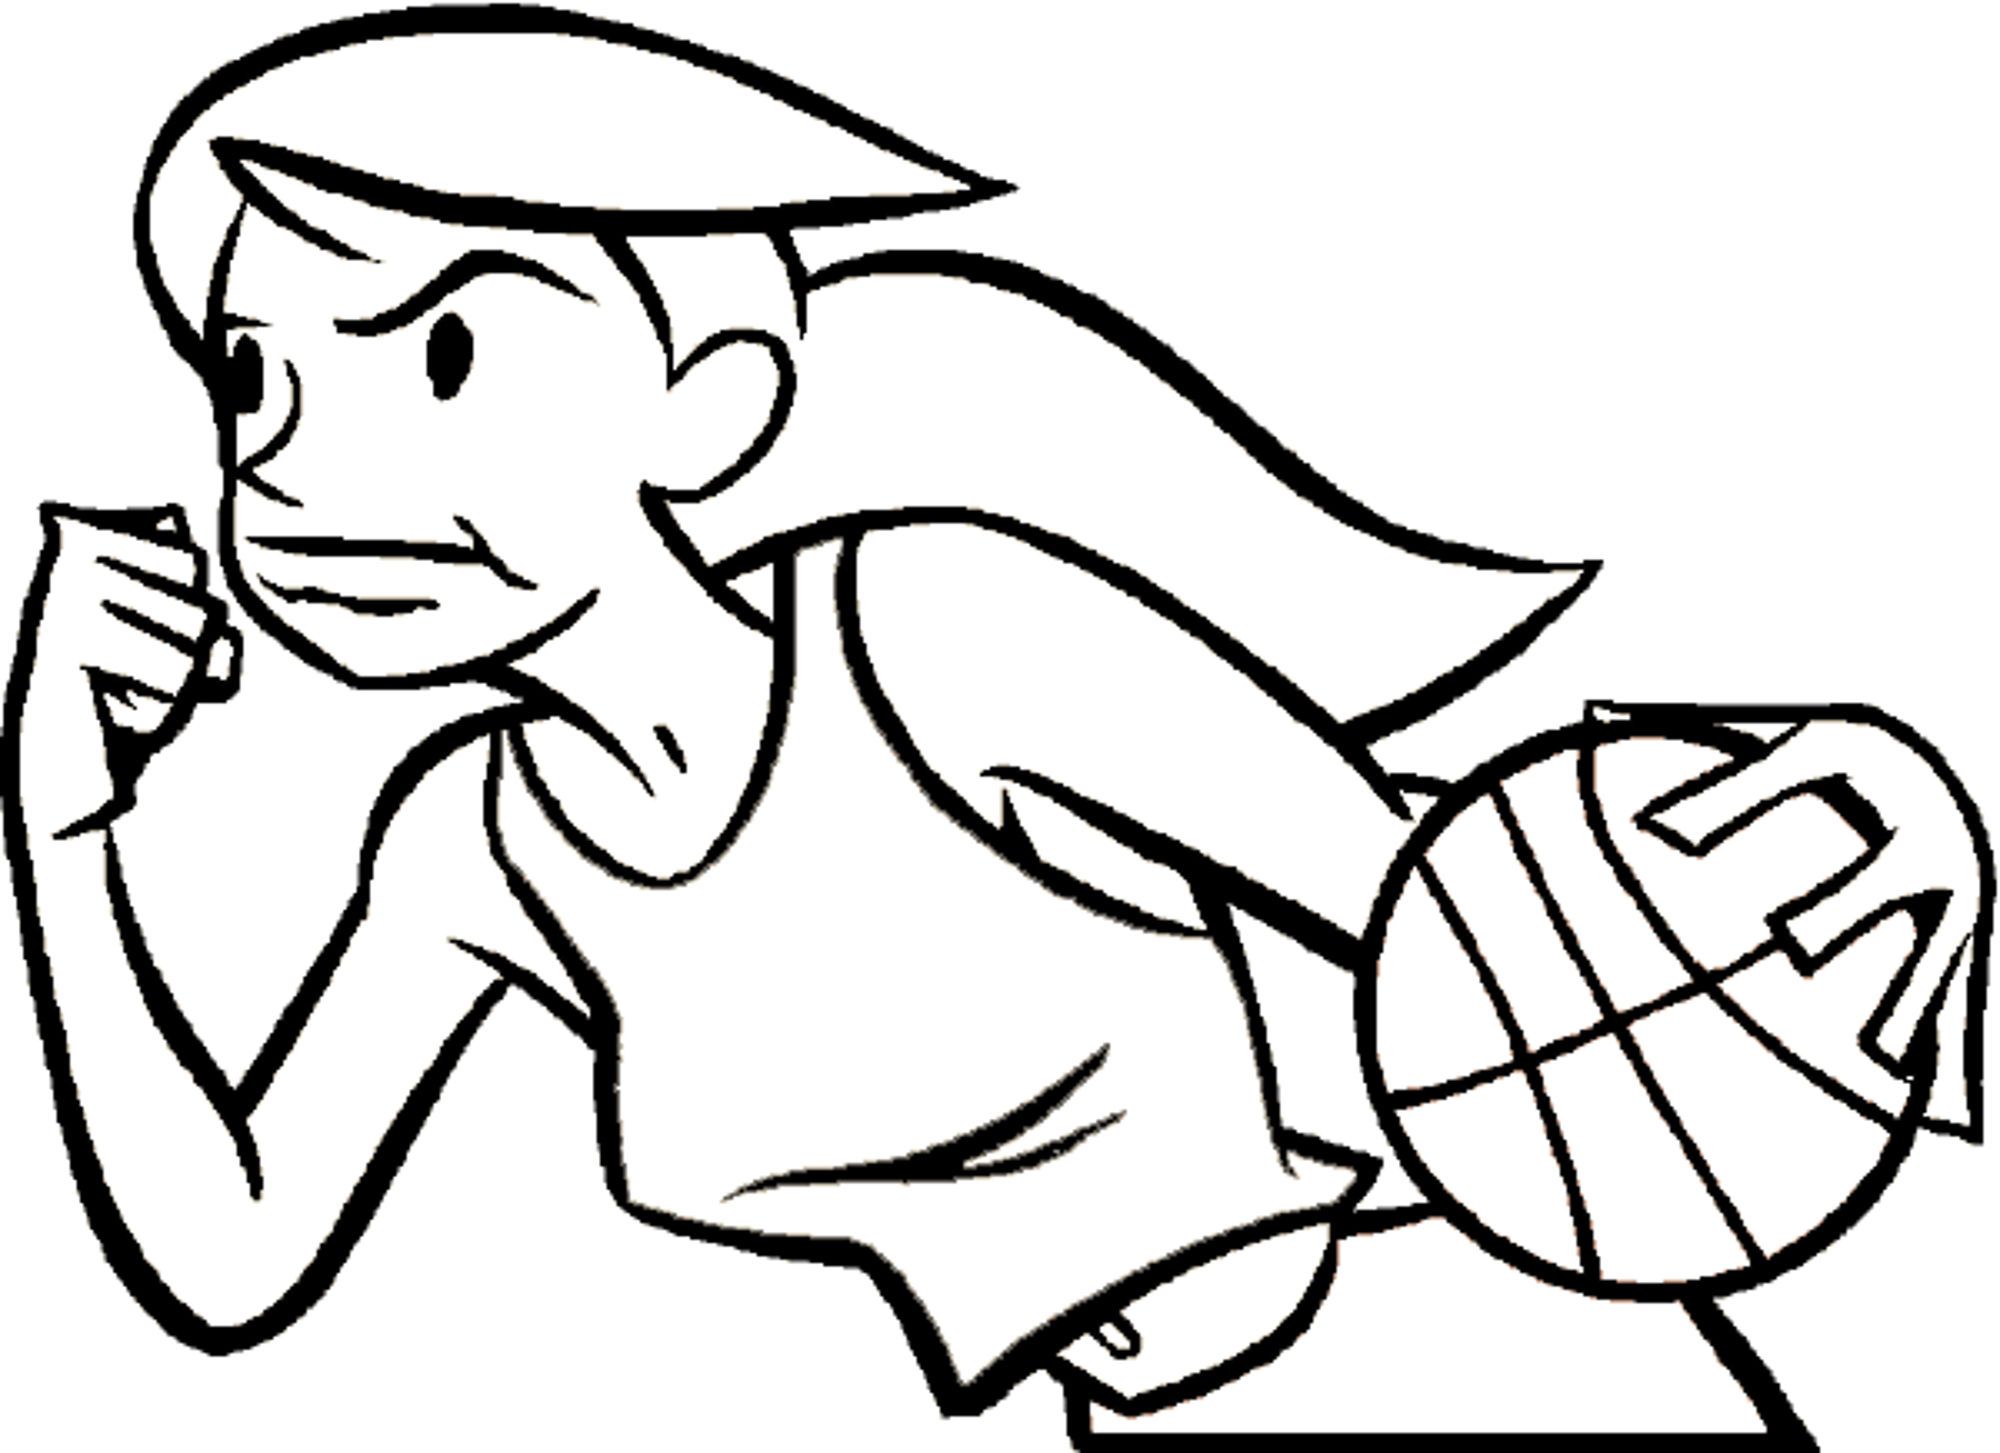 Girl Basketball Player Coloring Pages | Thousand of the Best printable ...